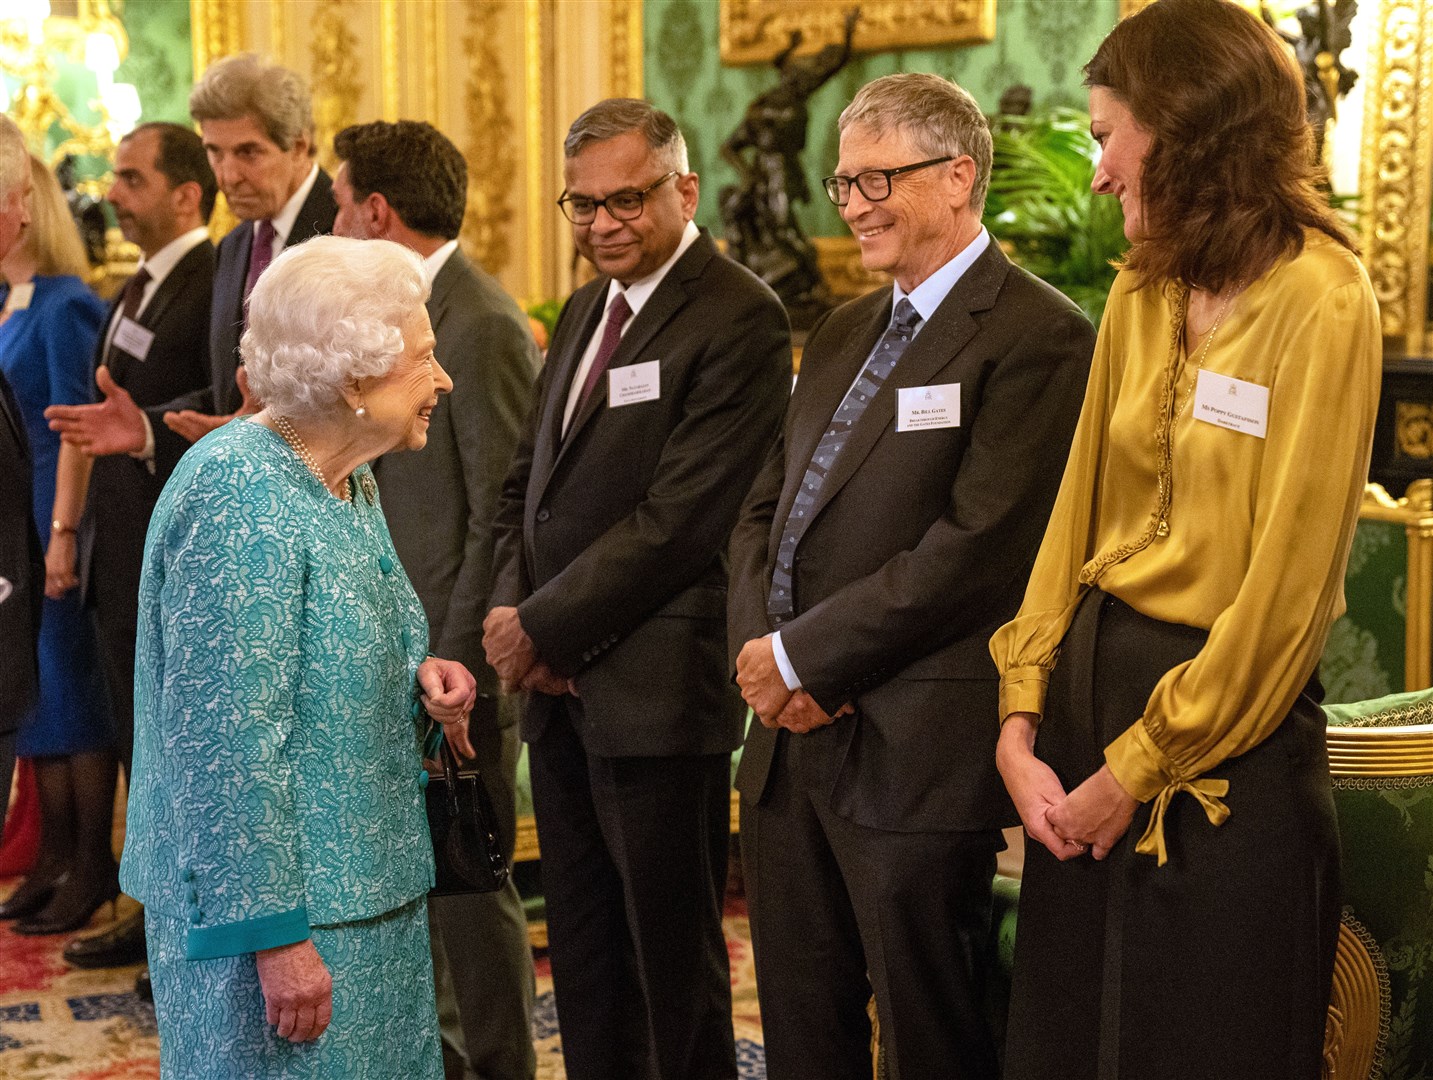 The Queen greets Bill Gates at a reception for international business and investment leaders (Arthur Edwards/The Sun)